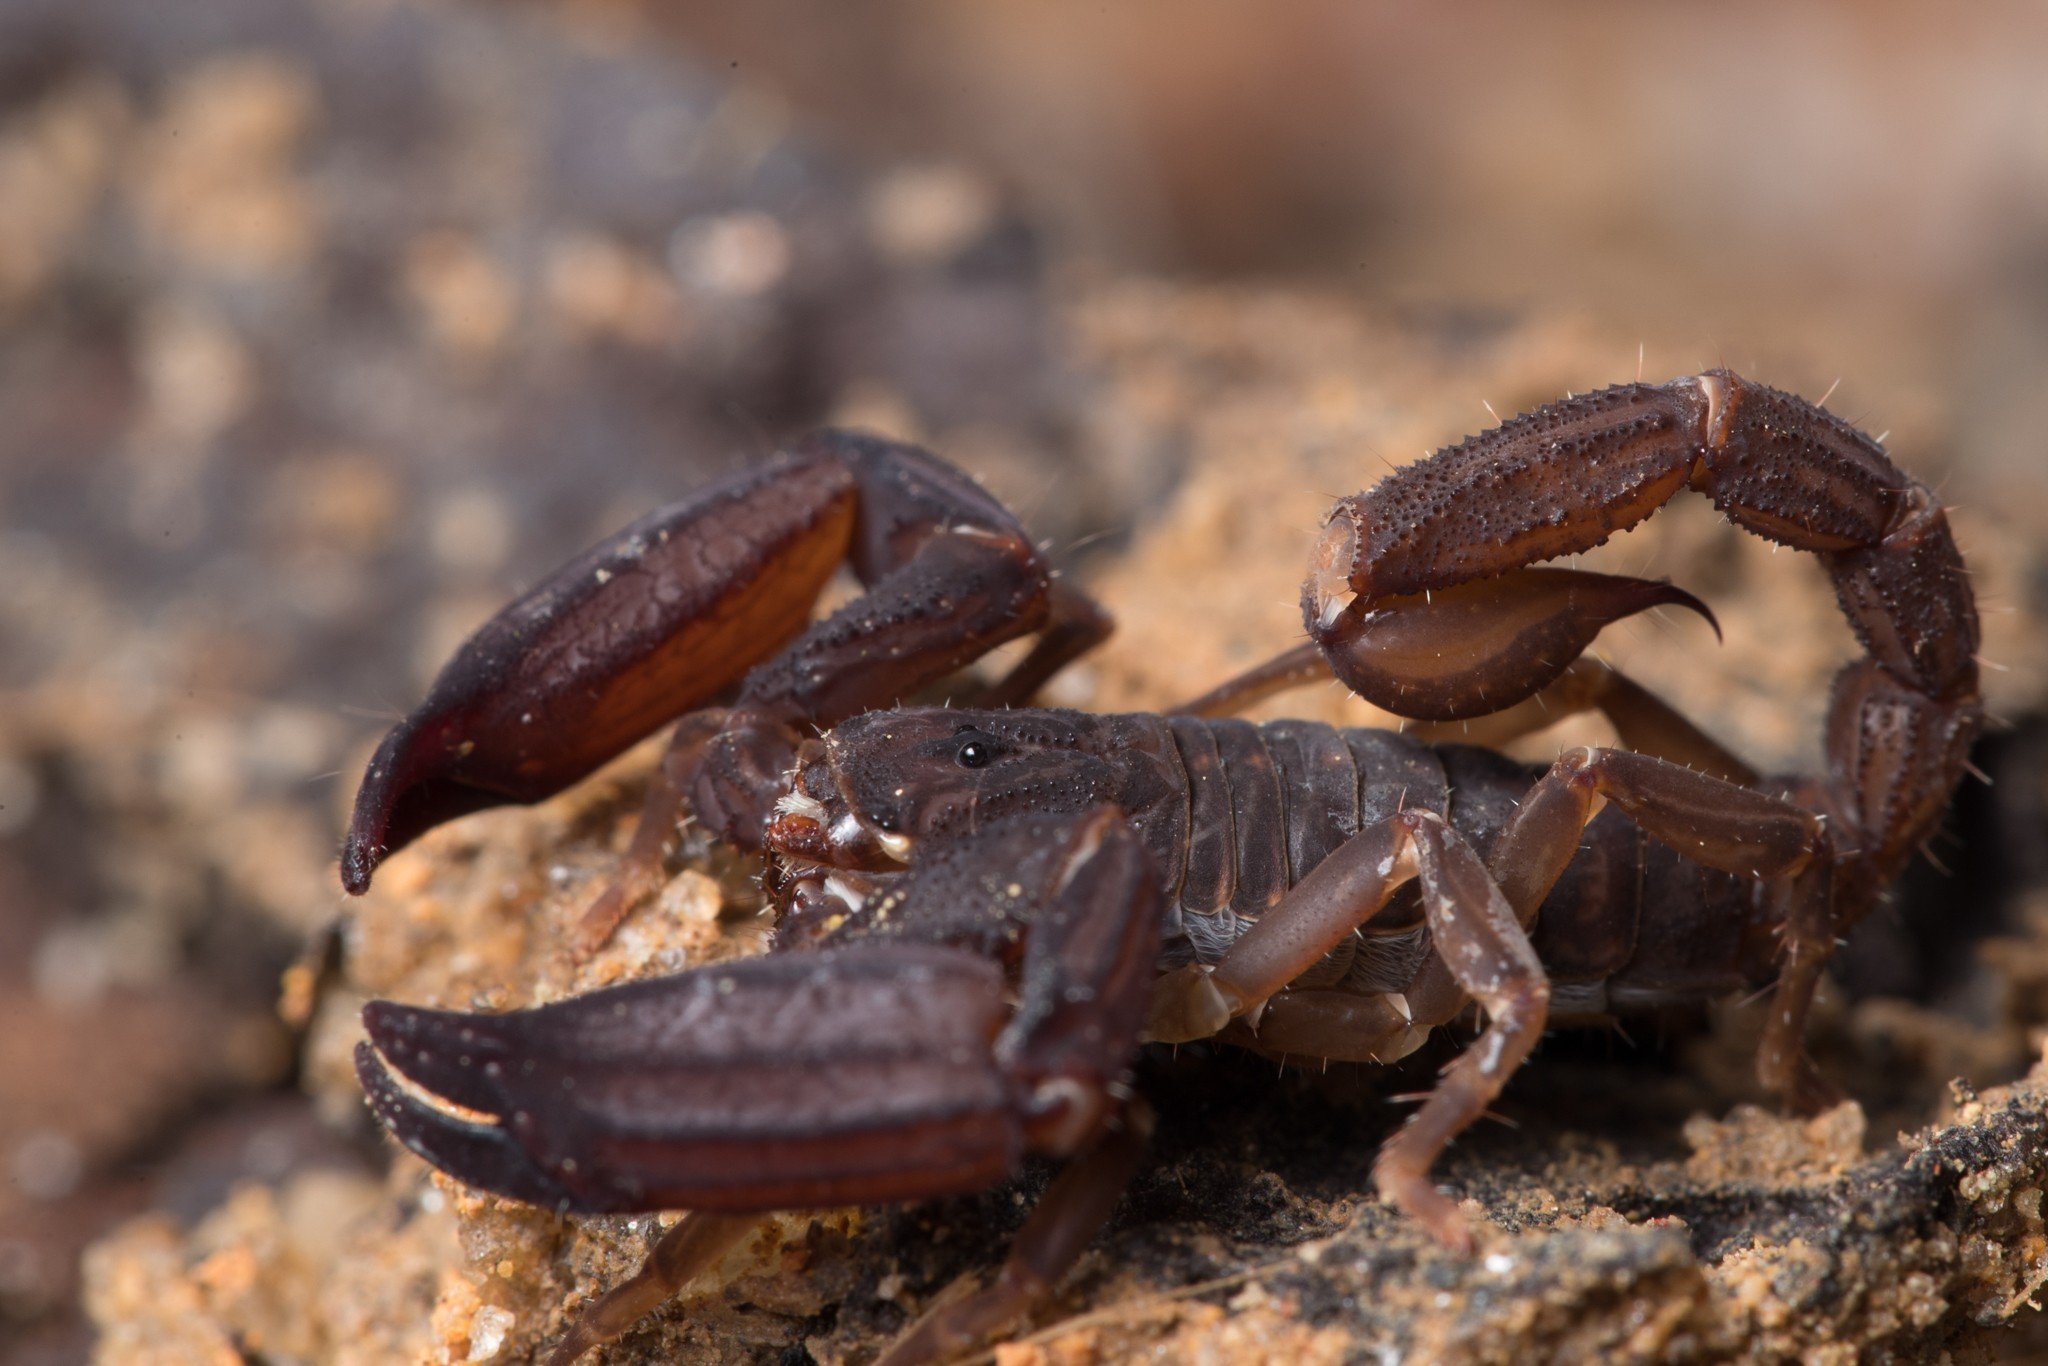 This new species of ‘ghost scorpion’ is among four new species that have been found so far as part of a recent whole-forest survey at The Habitat Penang Hill eco-park in Malaysia. Photo: Phil Torres/www.bioGraphic.com